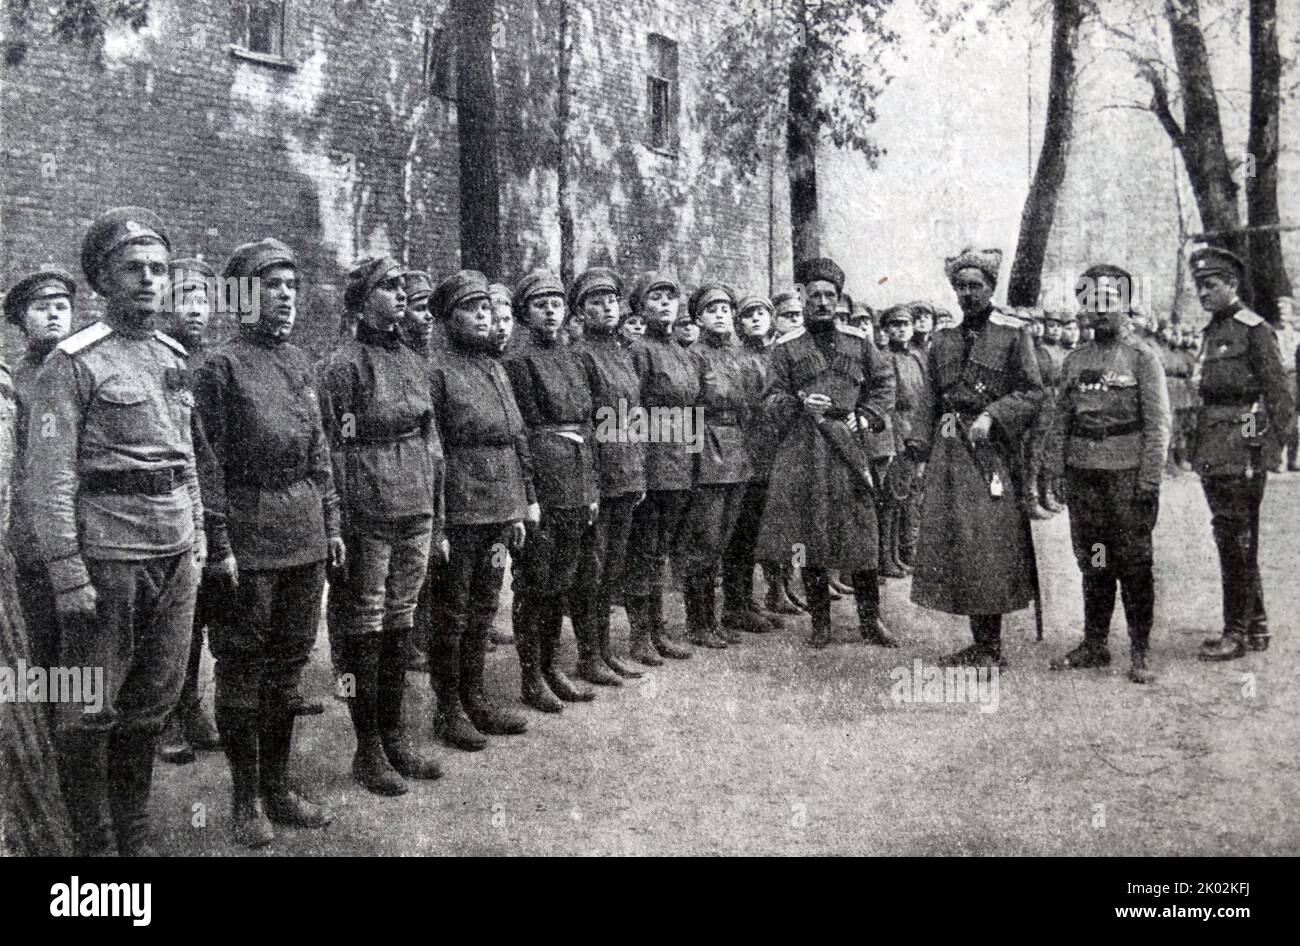 Women's Battalions (Russia) were all-female combat units formed after the February Revolution by the Russian Provisional Government, in a last-ditch effort to inspire the mass of war-weary soldiers to continue fighting in World War I. Stock Photo